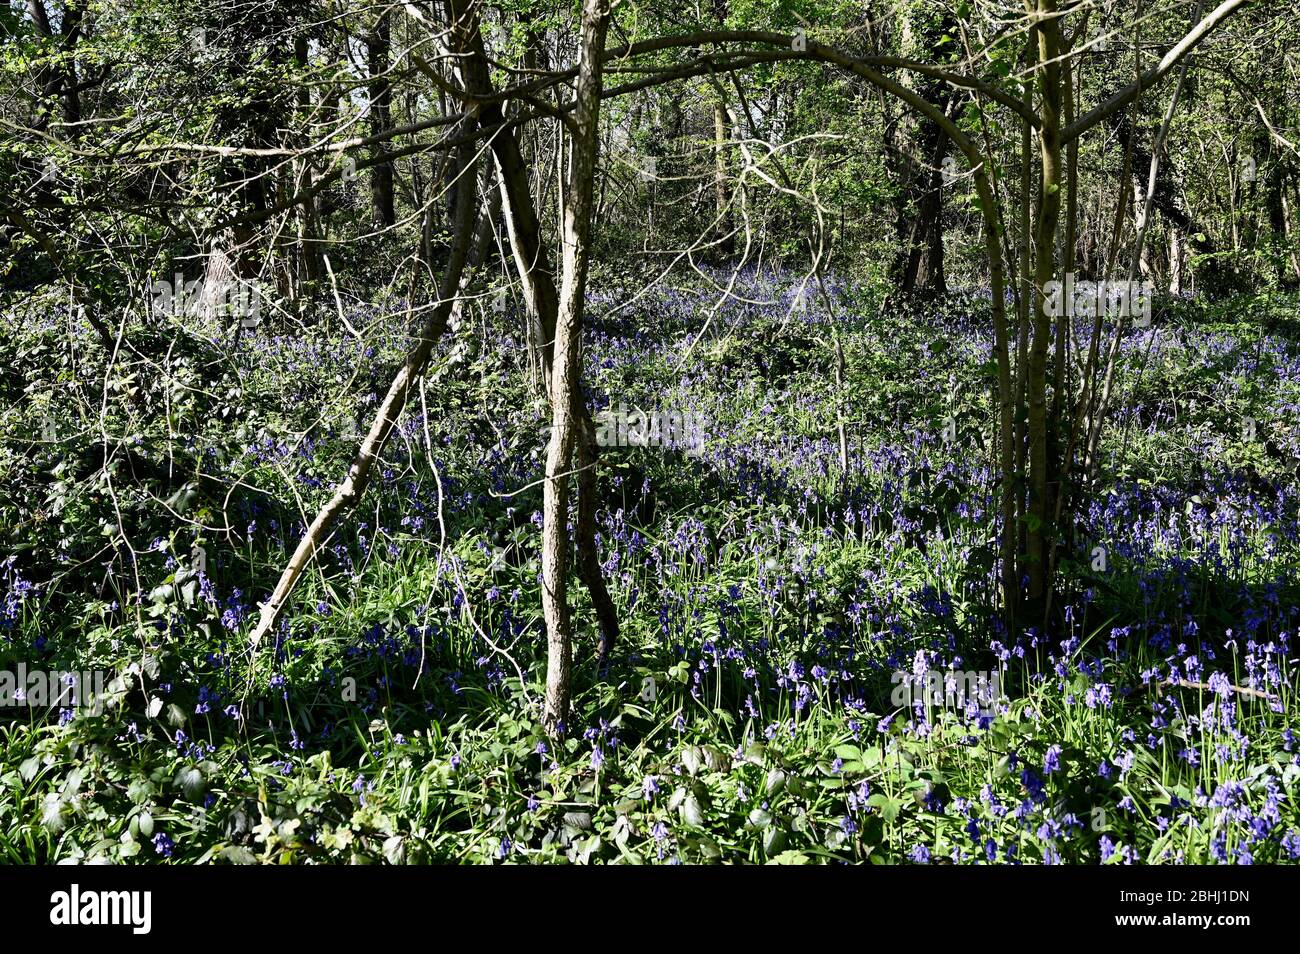 Bluebell Woods. Racines Cray Meadows, Sidcup, Kent. ROYAUME-UNI Banque D'Images